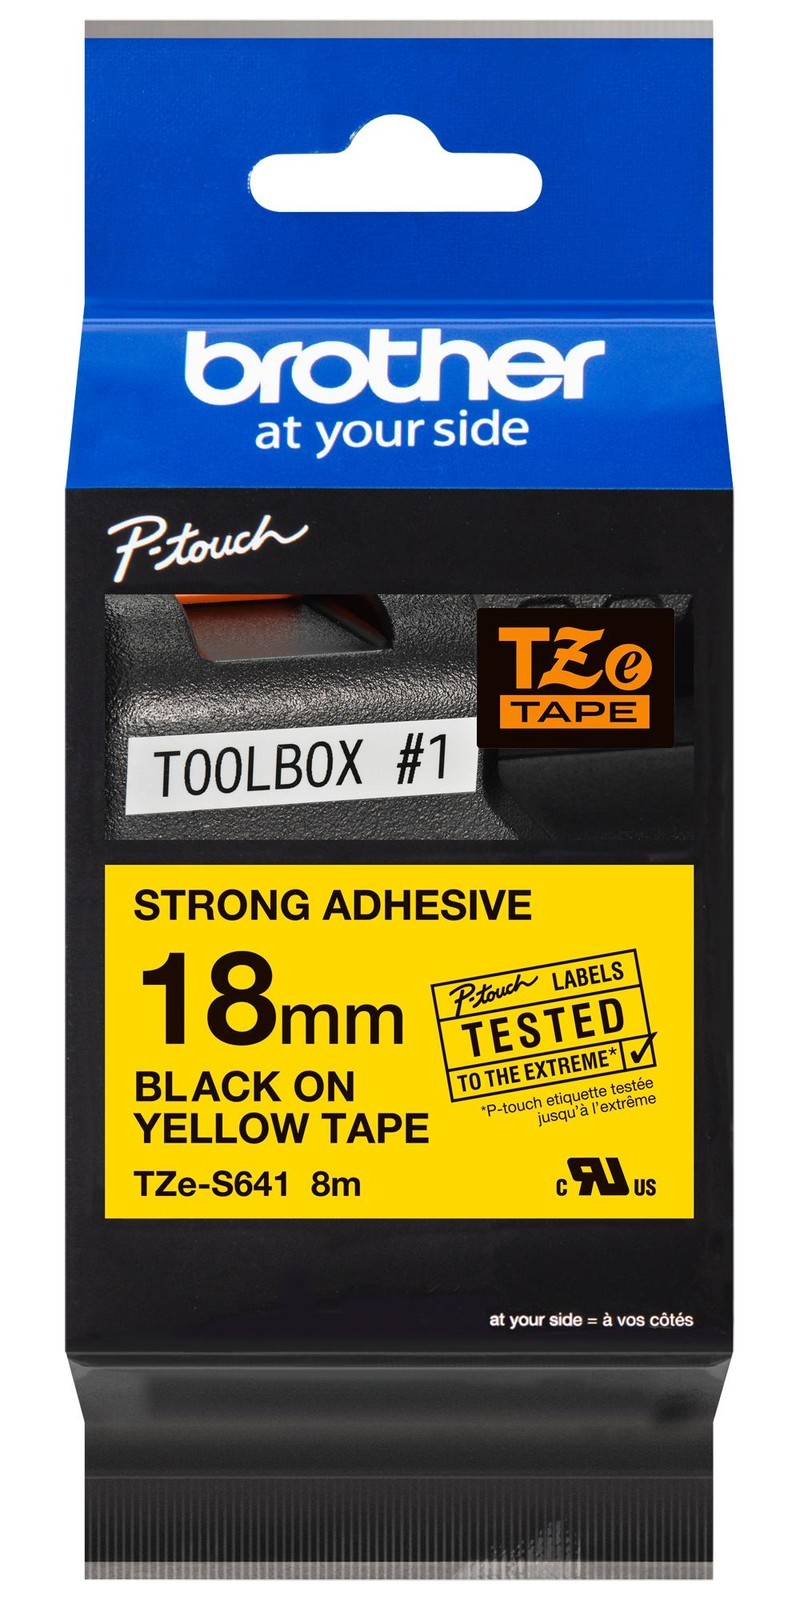 Brother Tze-S641 Tape, 18mm, Black/yellow, S/adh